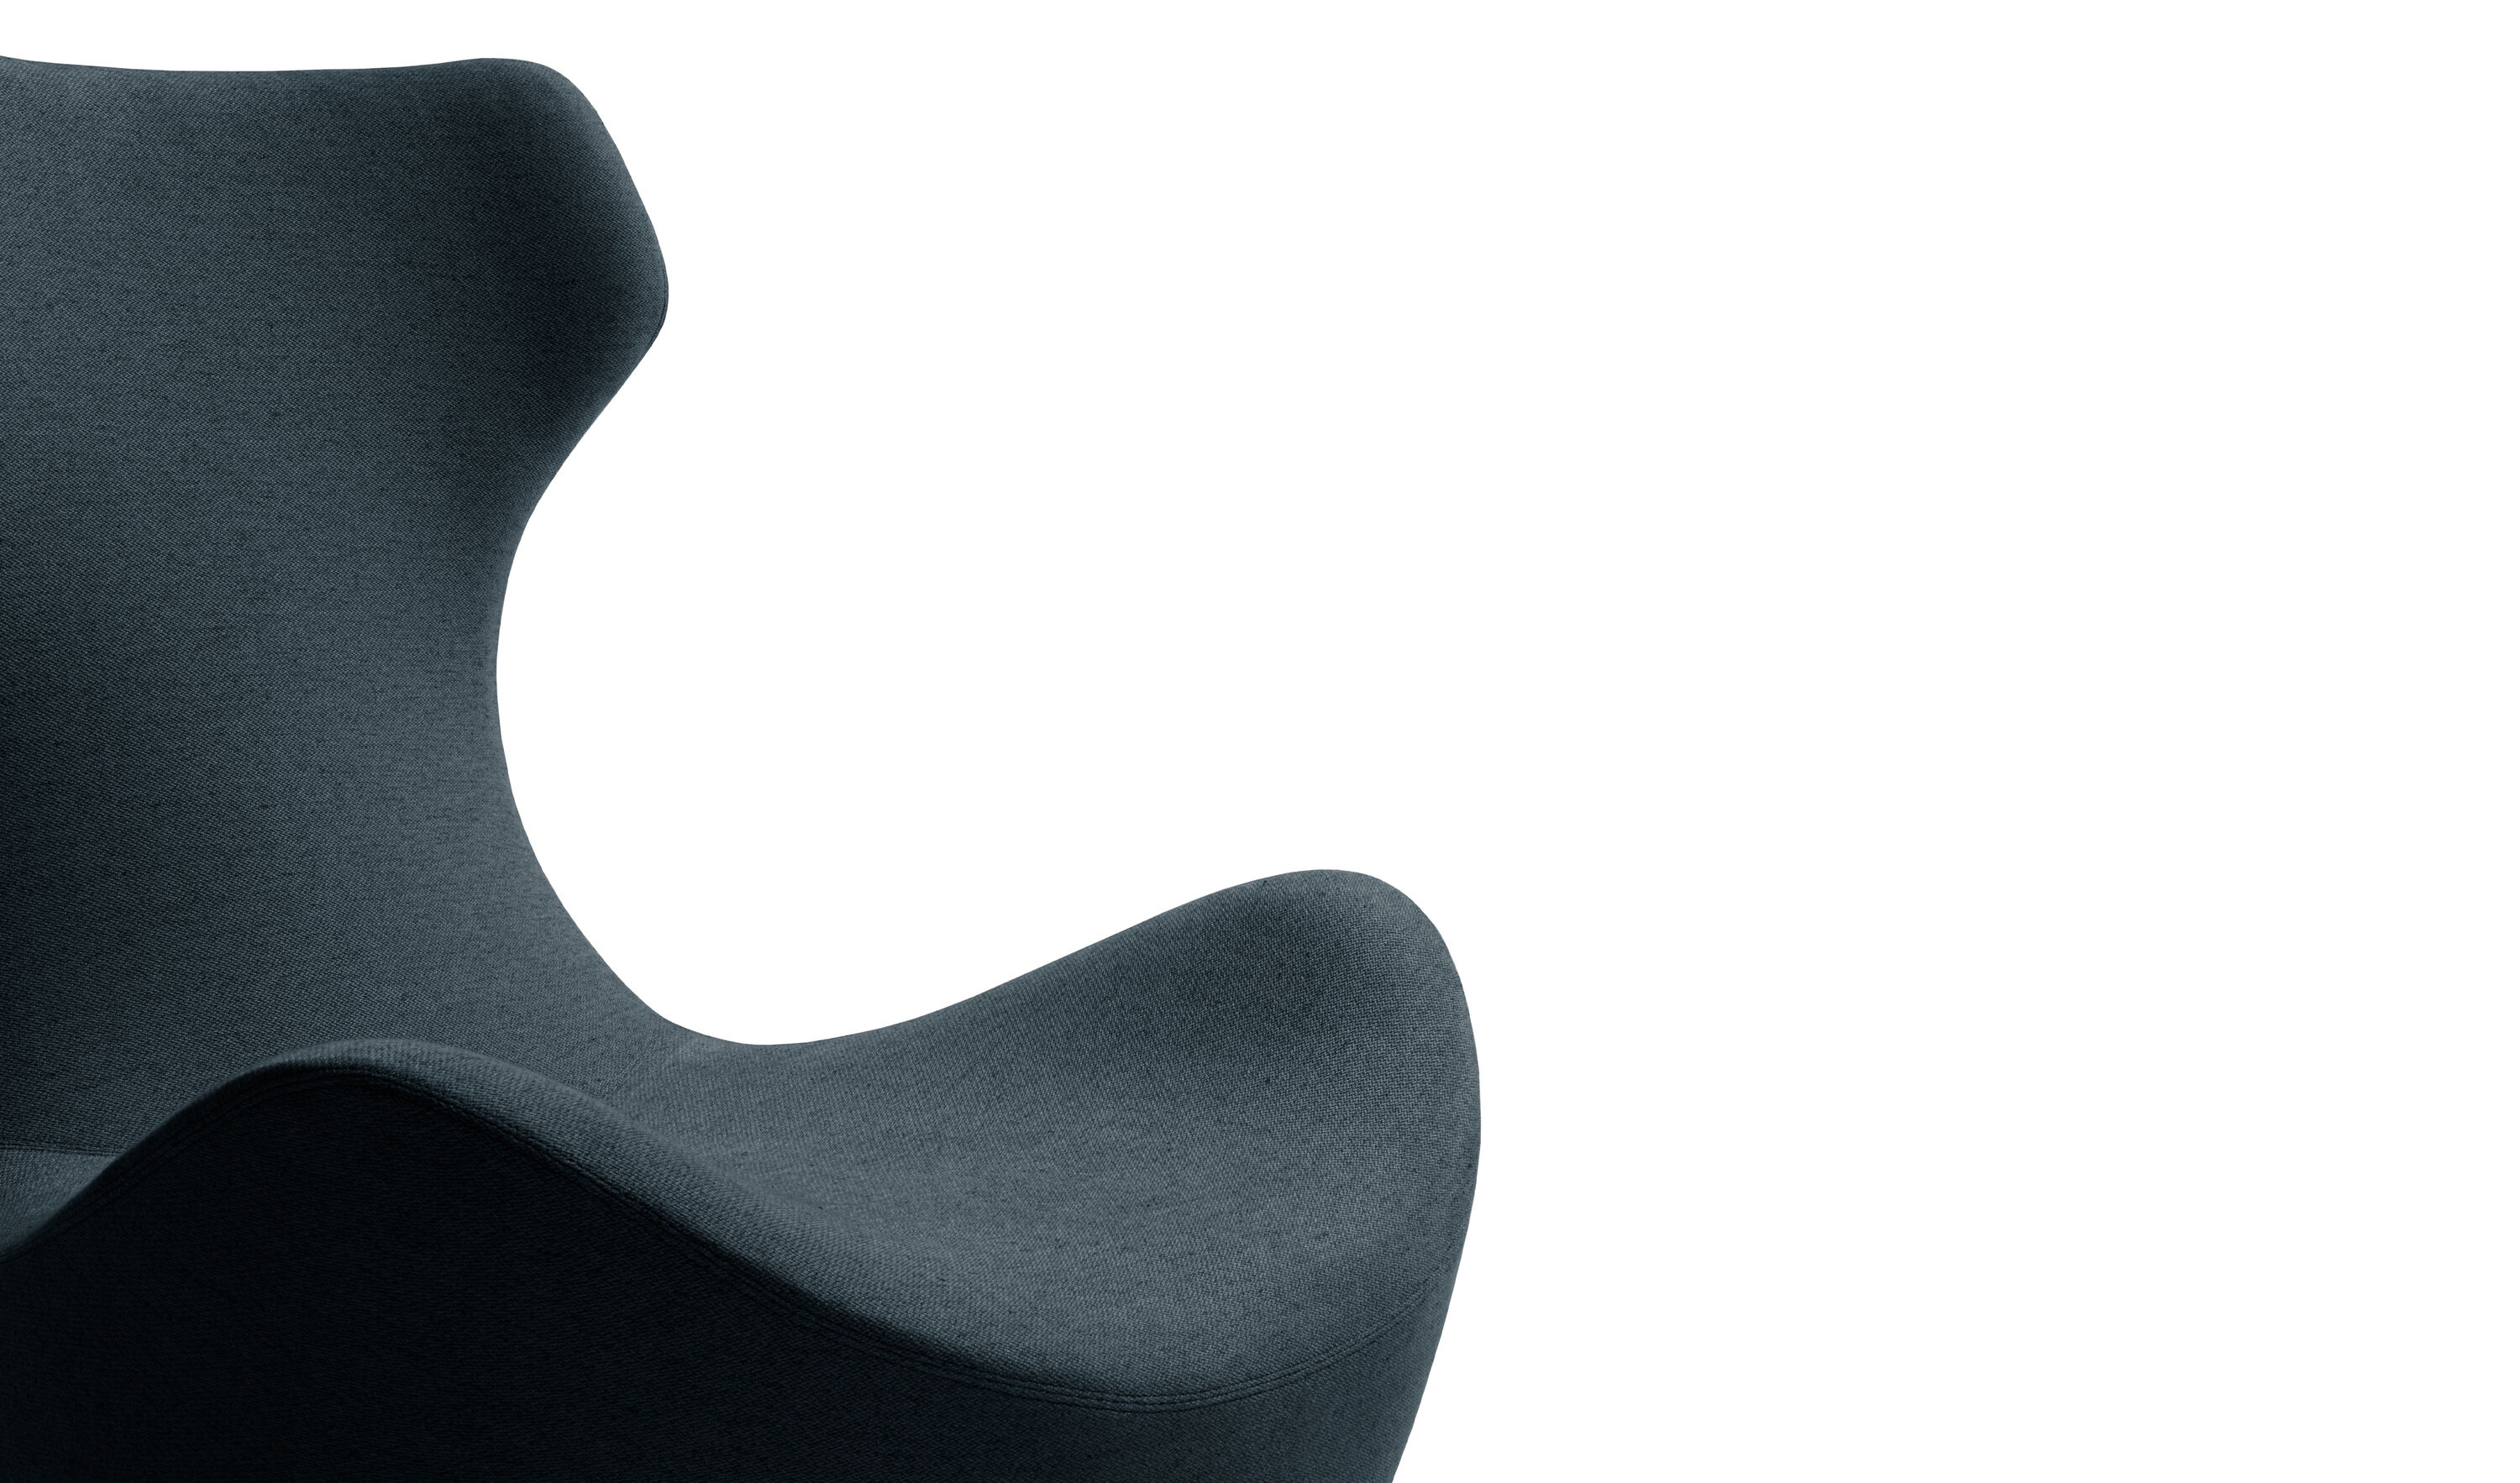 Grande Papilio - Armchair and Footrest | B&B Italia Official Shop